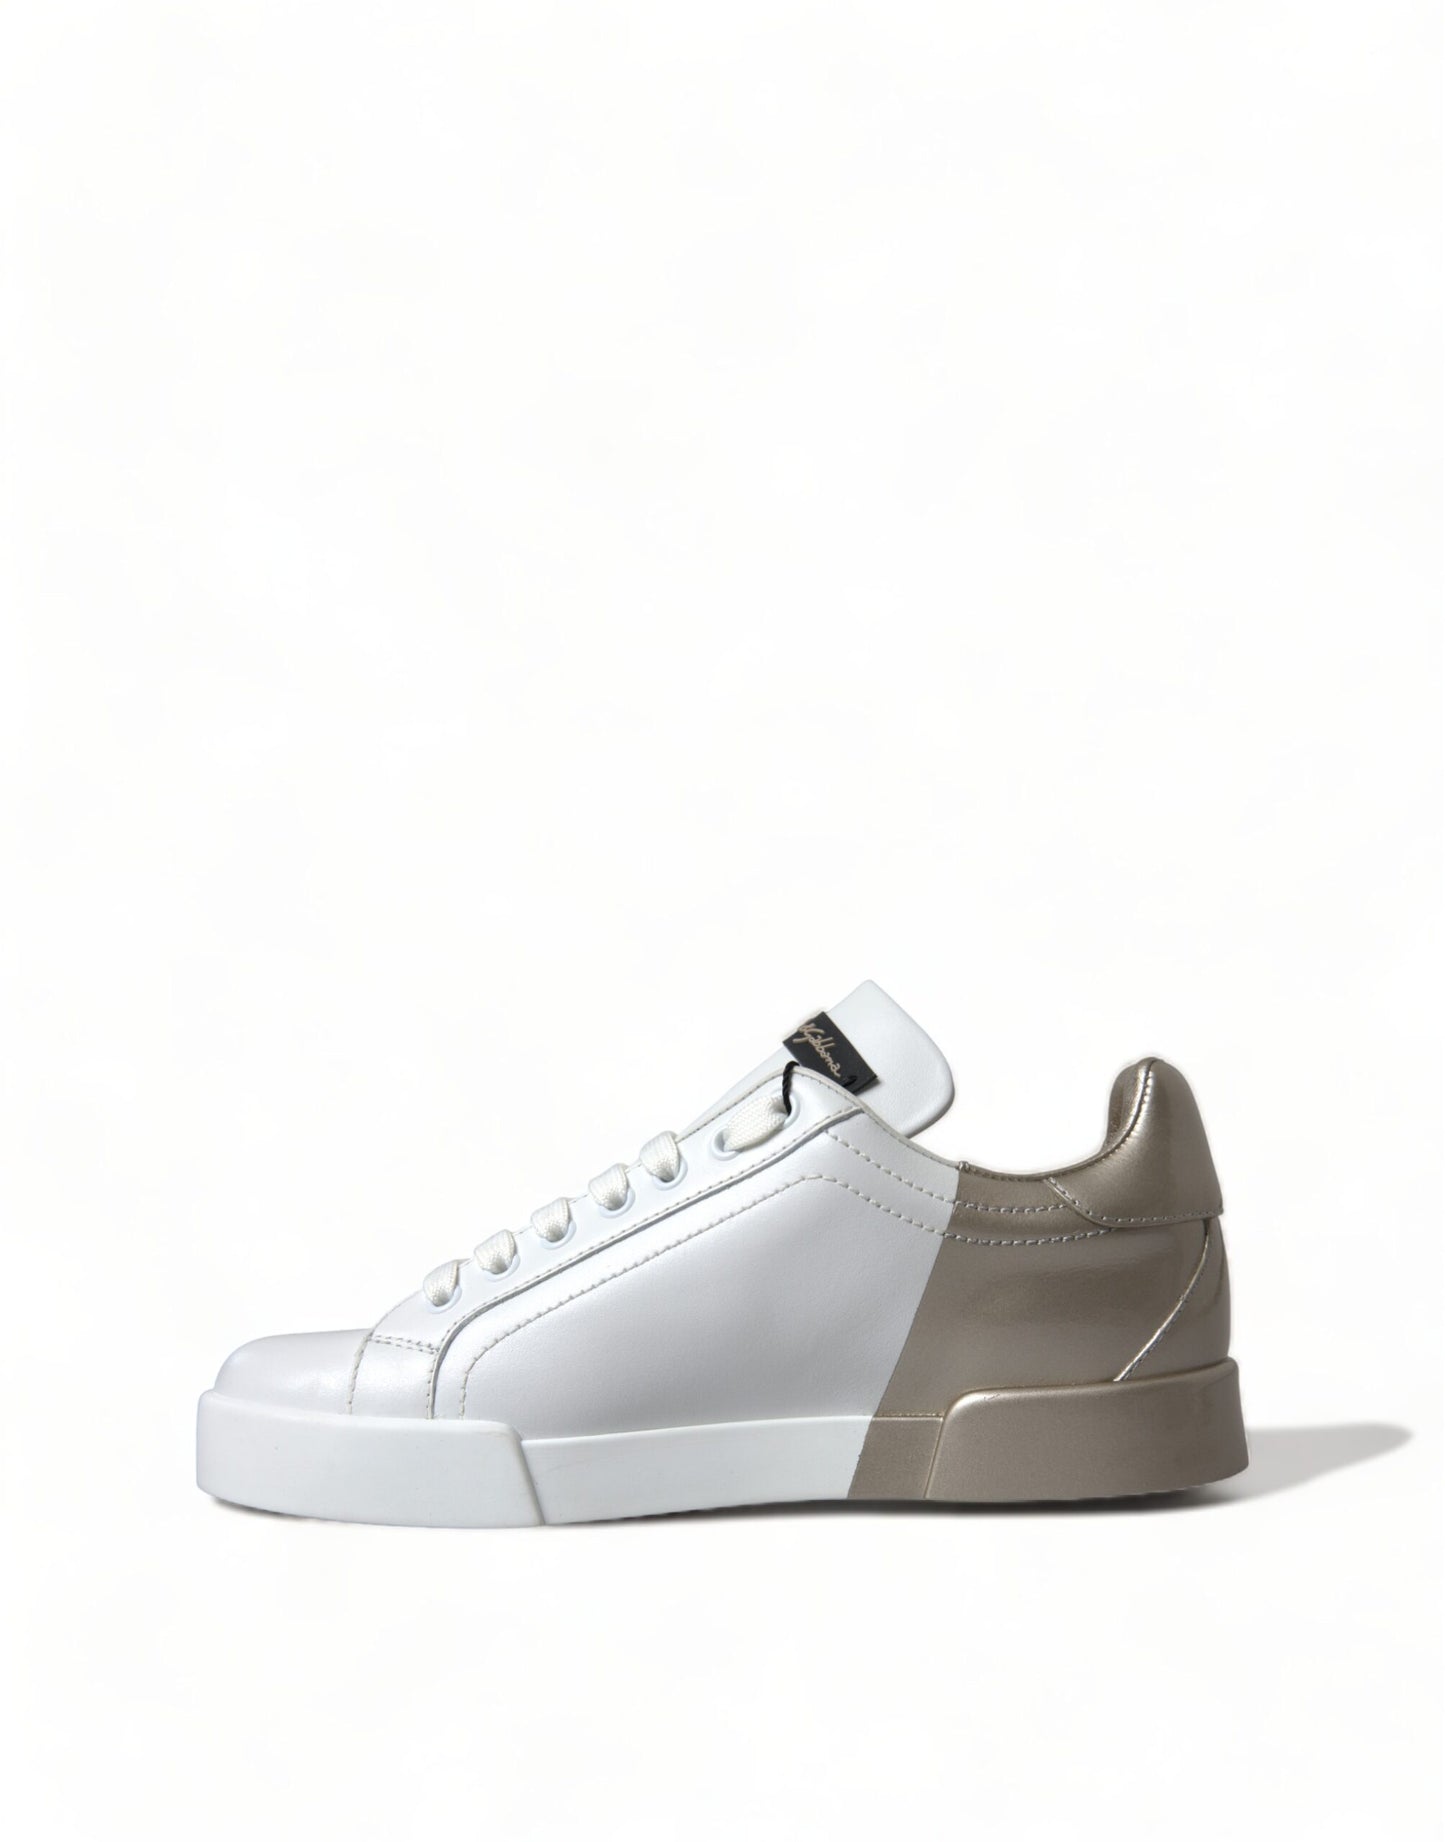 Elegant White & Gold Leather Sneakers